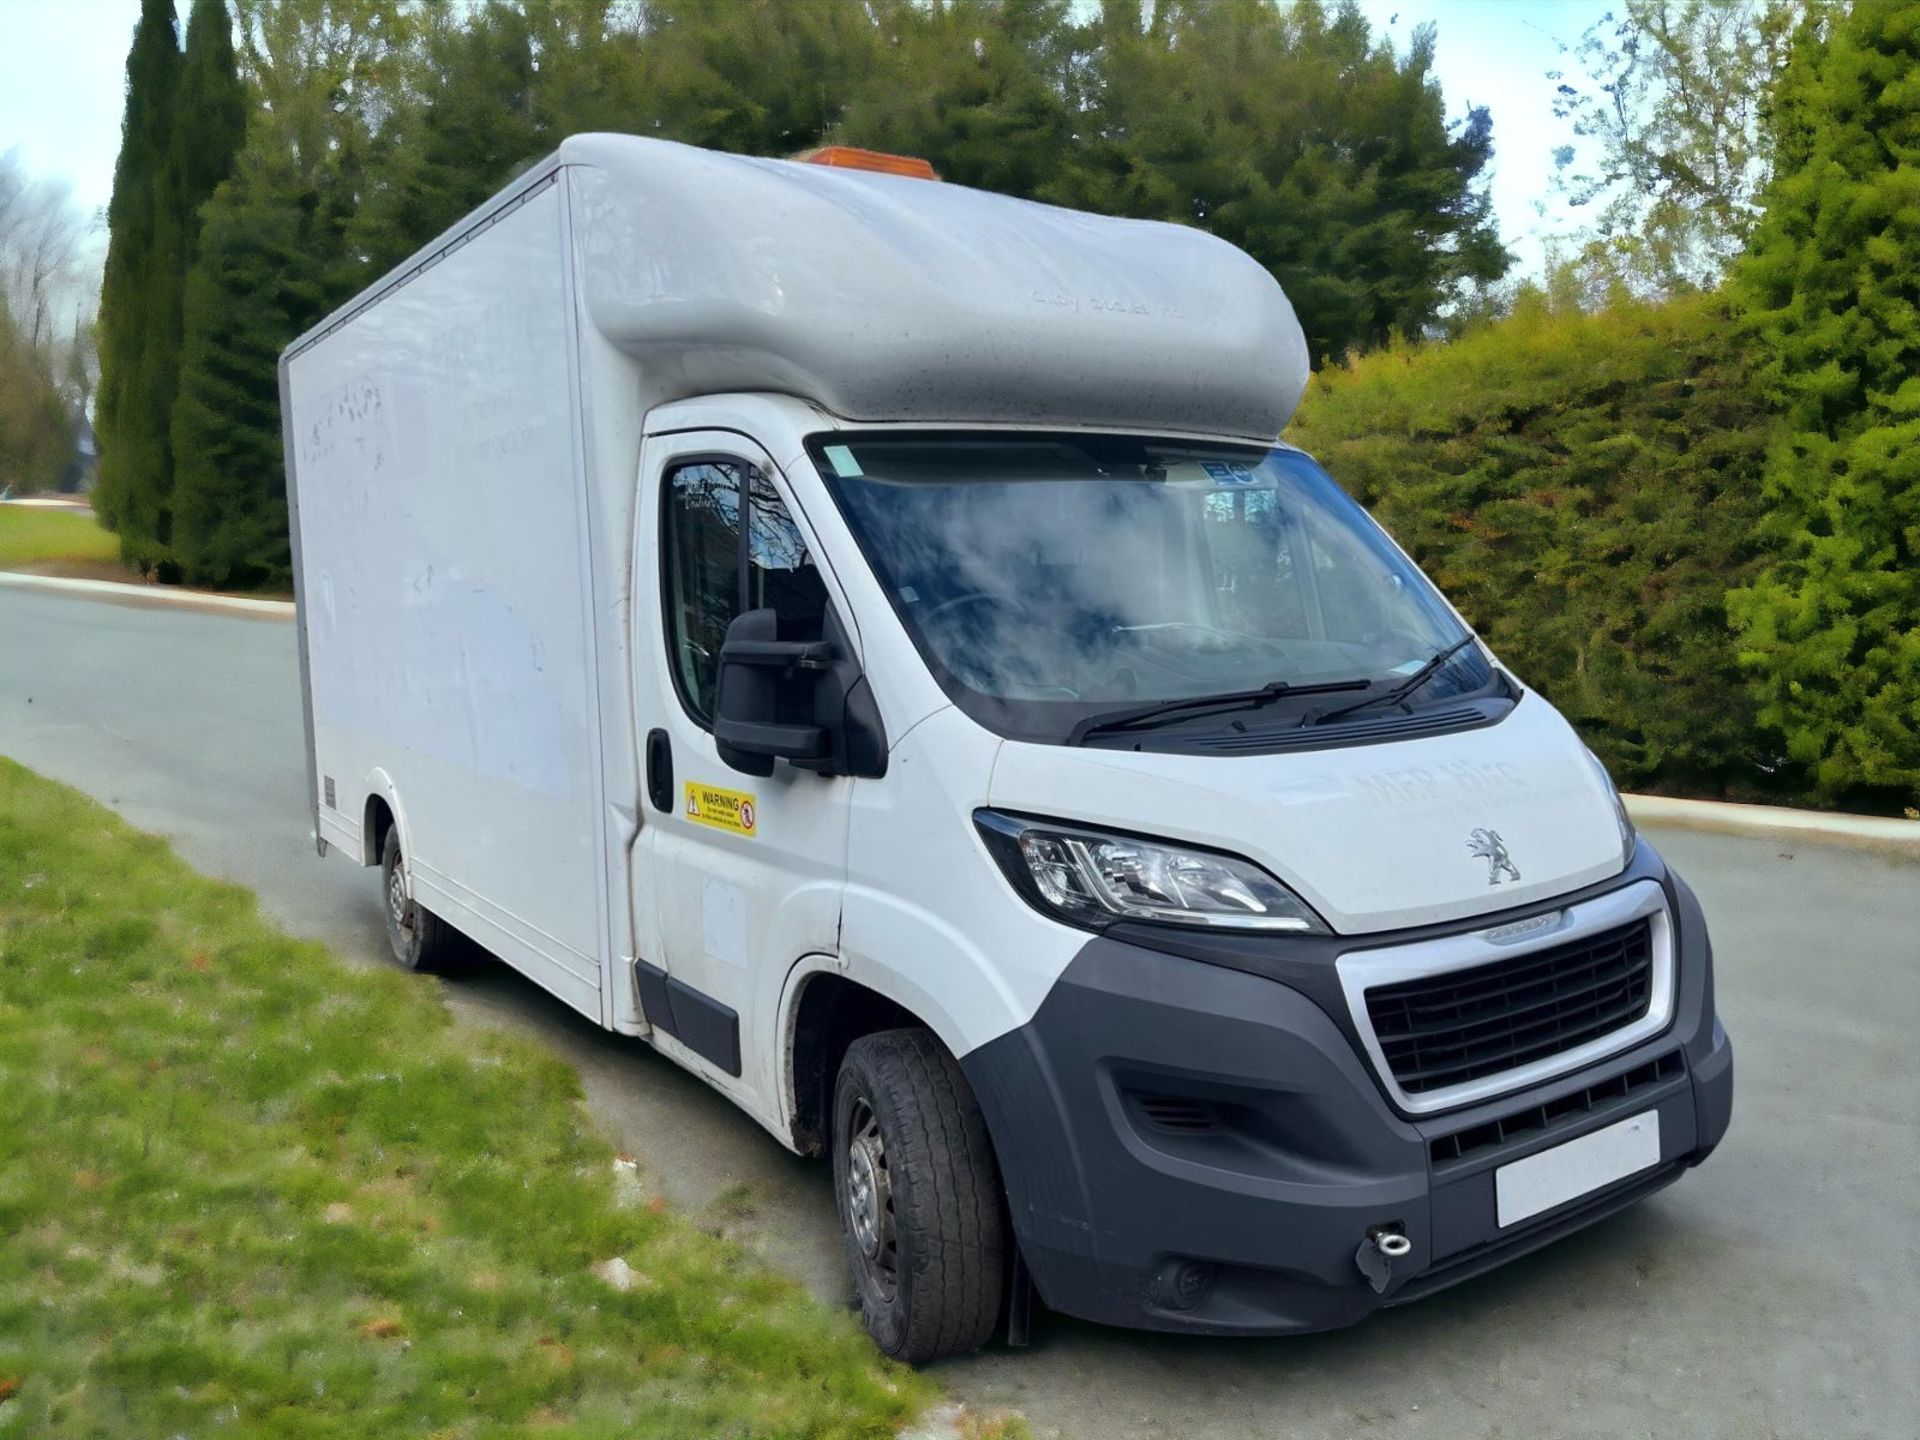 2017 PEUGEOT BOXER LWB LOW LOADER BOX WITH LARGE TAIL LIFT **SPARES OR REPAIRS** - Image 2 of 9